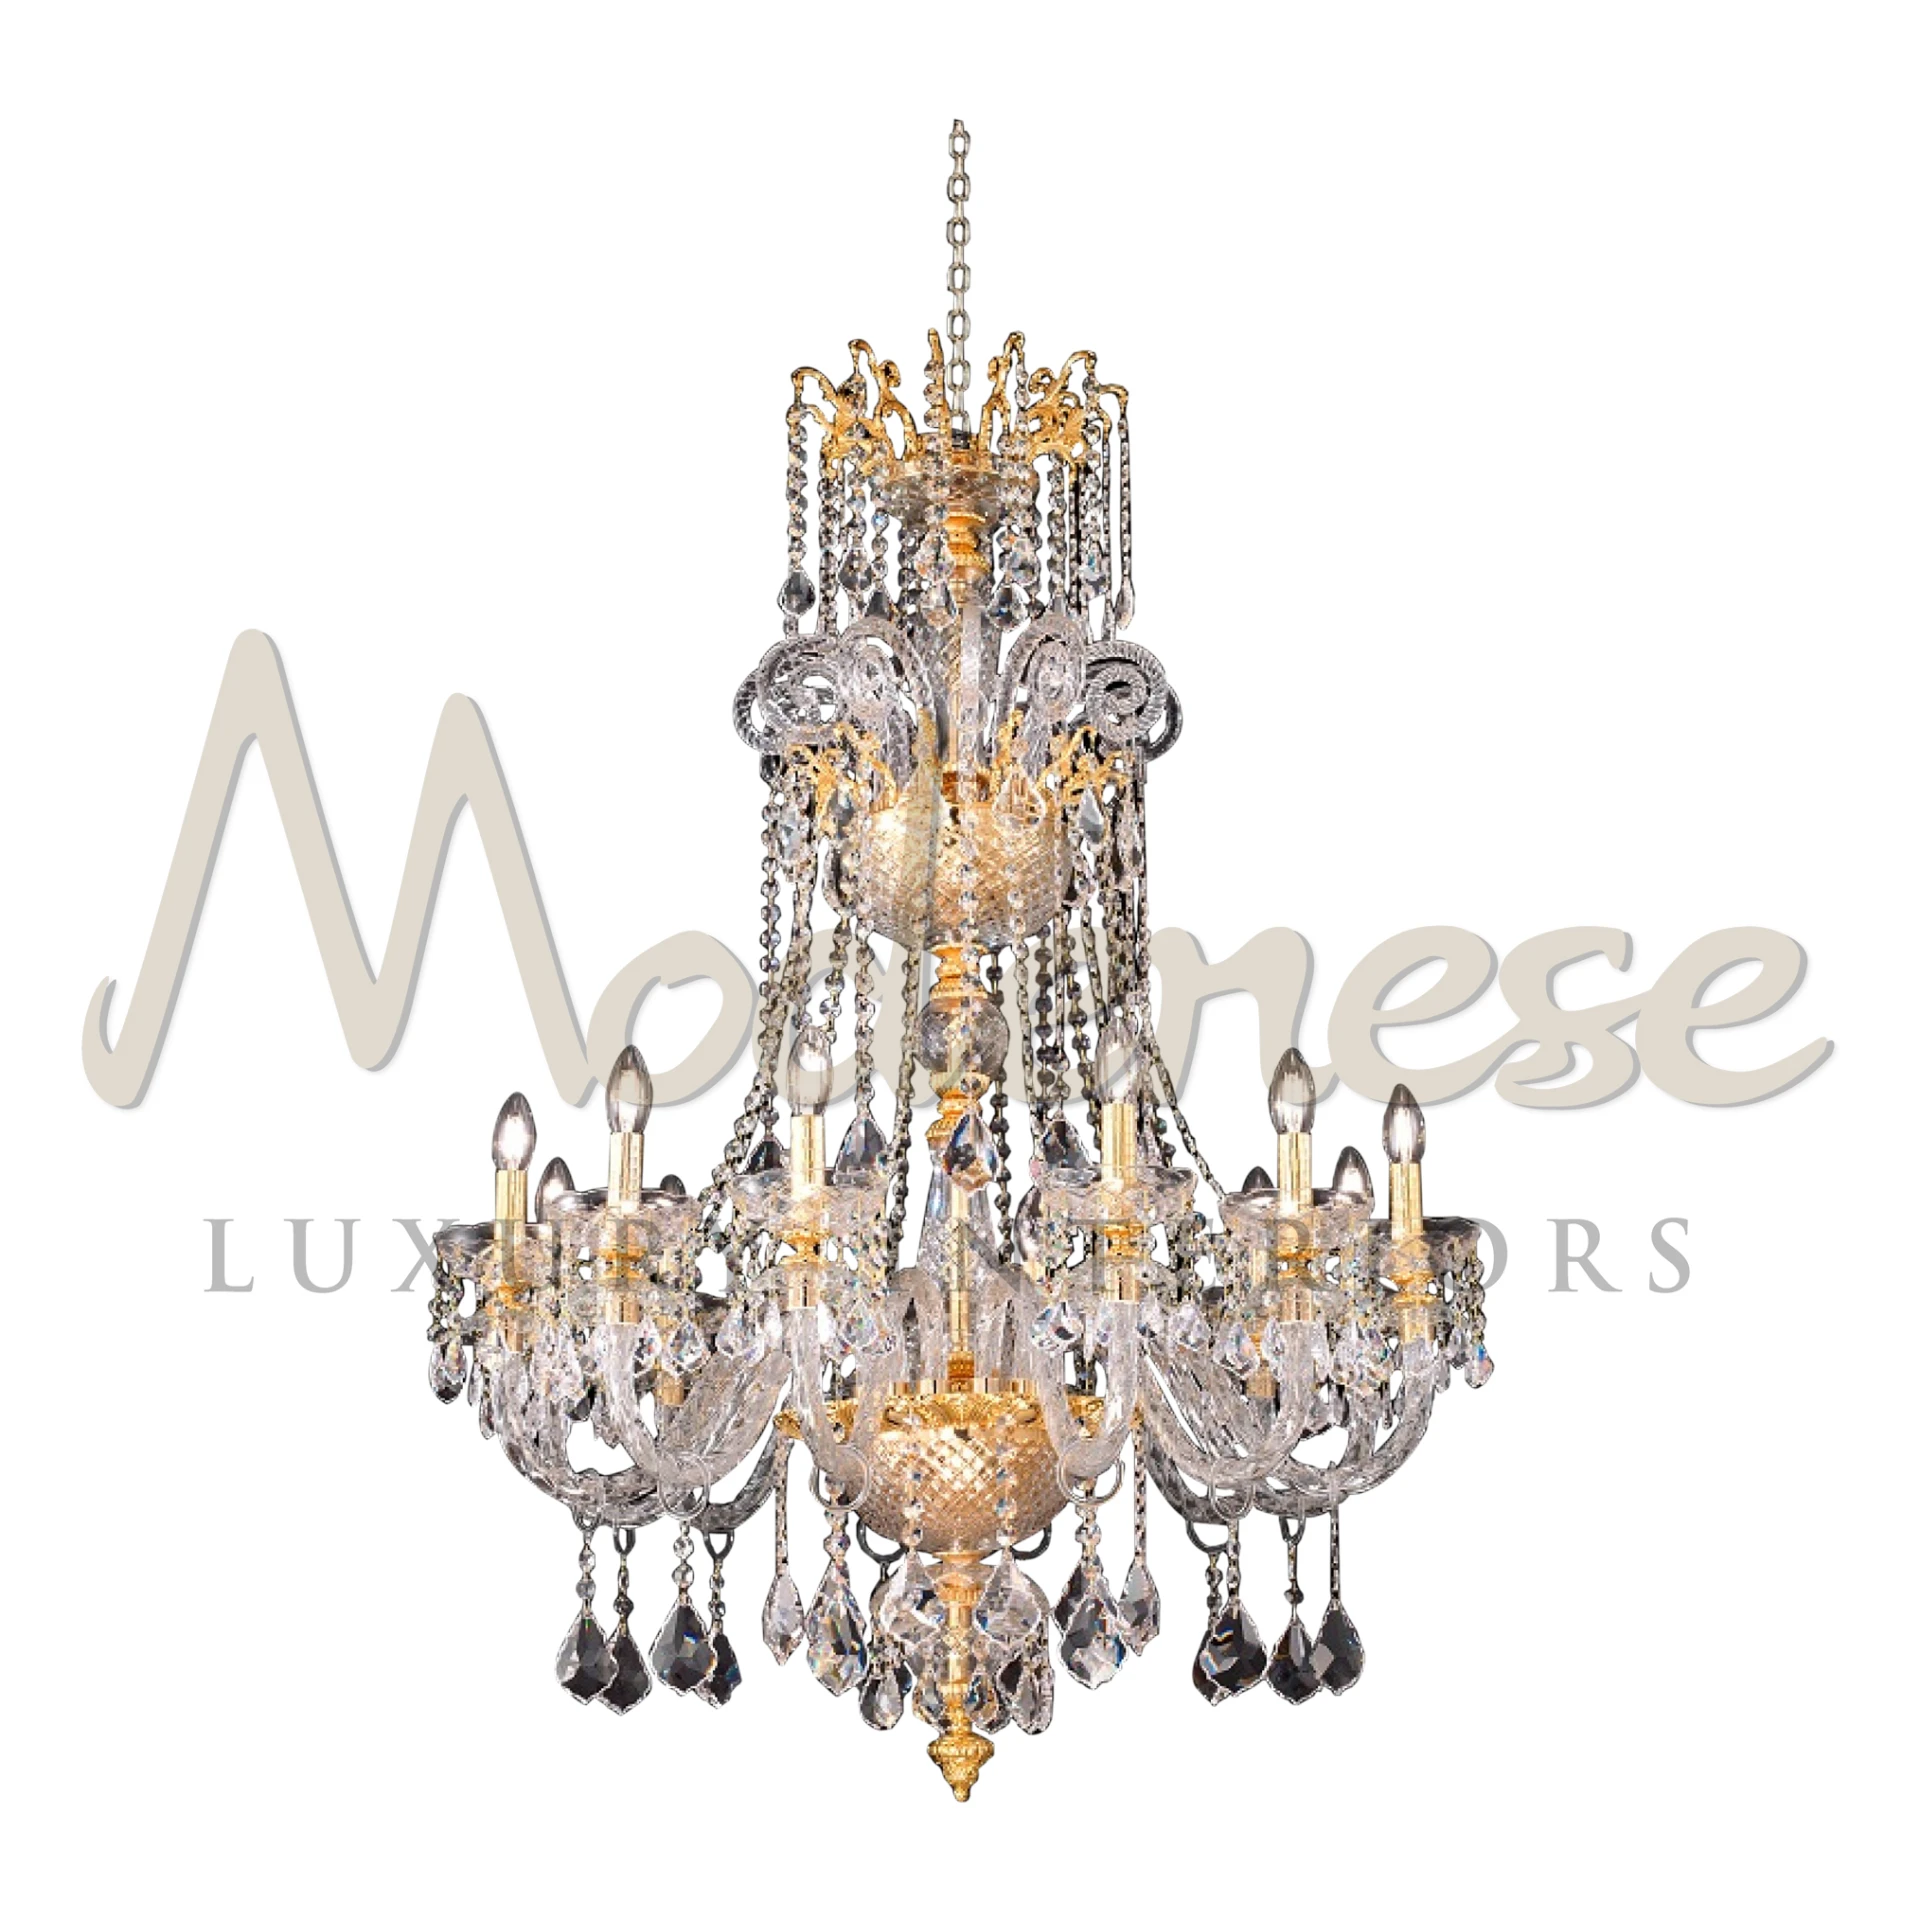 Stylish 'Luxe Palazzo Chandelier' with gold accents and shimmering crystal droplets design